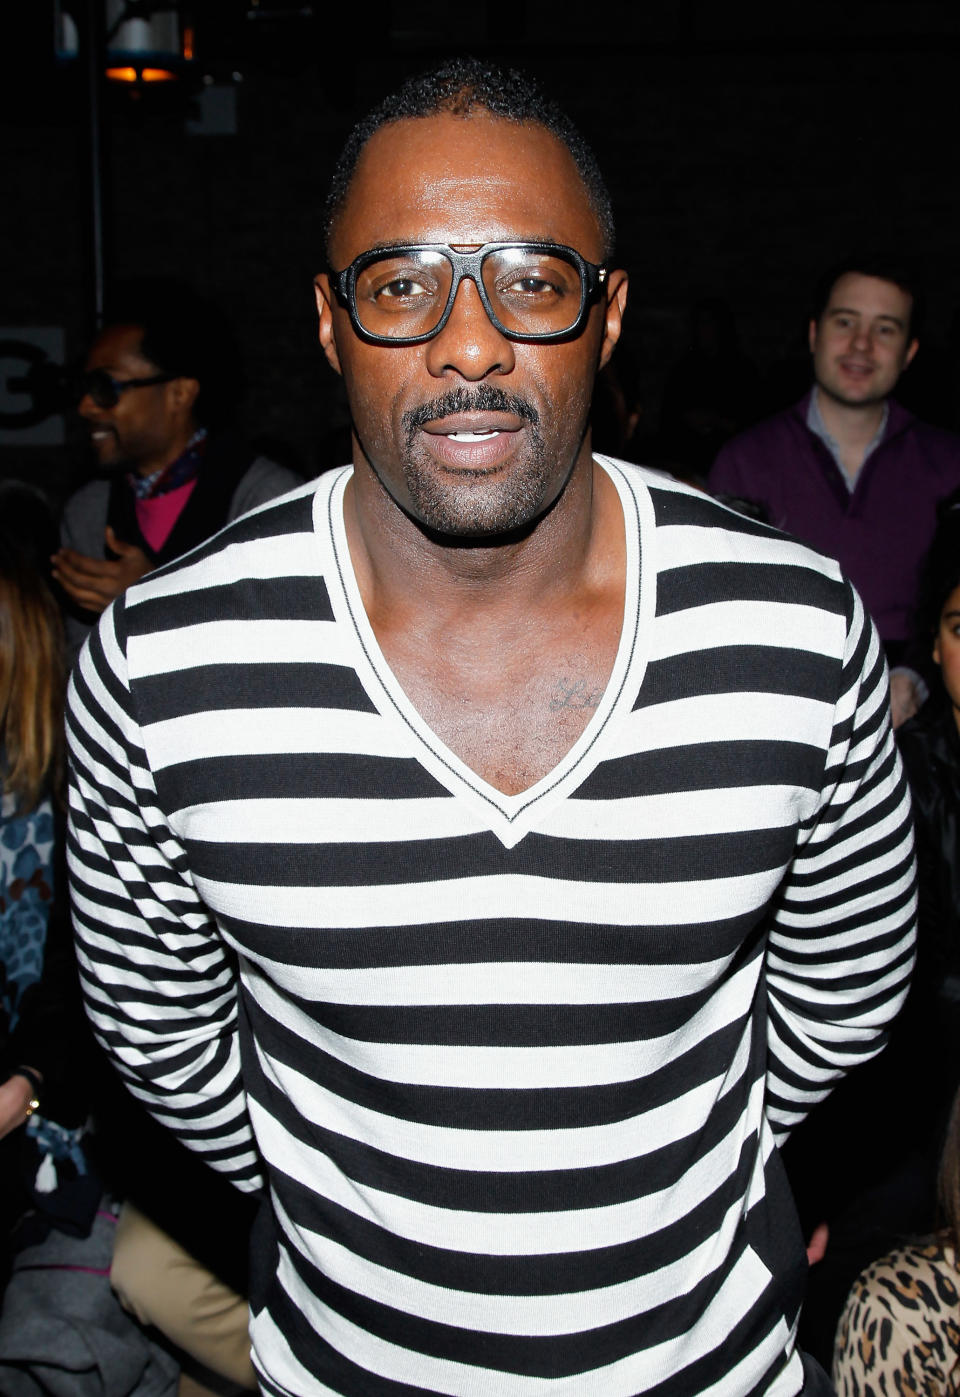 NEW YORK, NY - FEBRUARY 12:  Idris Elba attends the Y-3 Fashion Show Autumn/Winter 2012-13 at 82 Mercer on February 12, 2012 in New York City.  (Photo by Joe Kohen/Getty Images for Y-3)